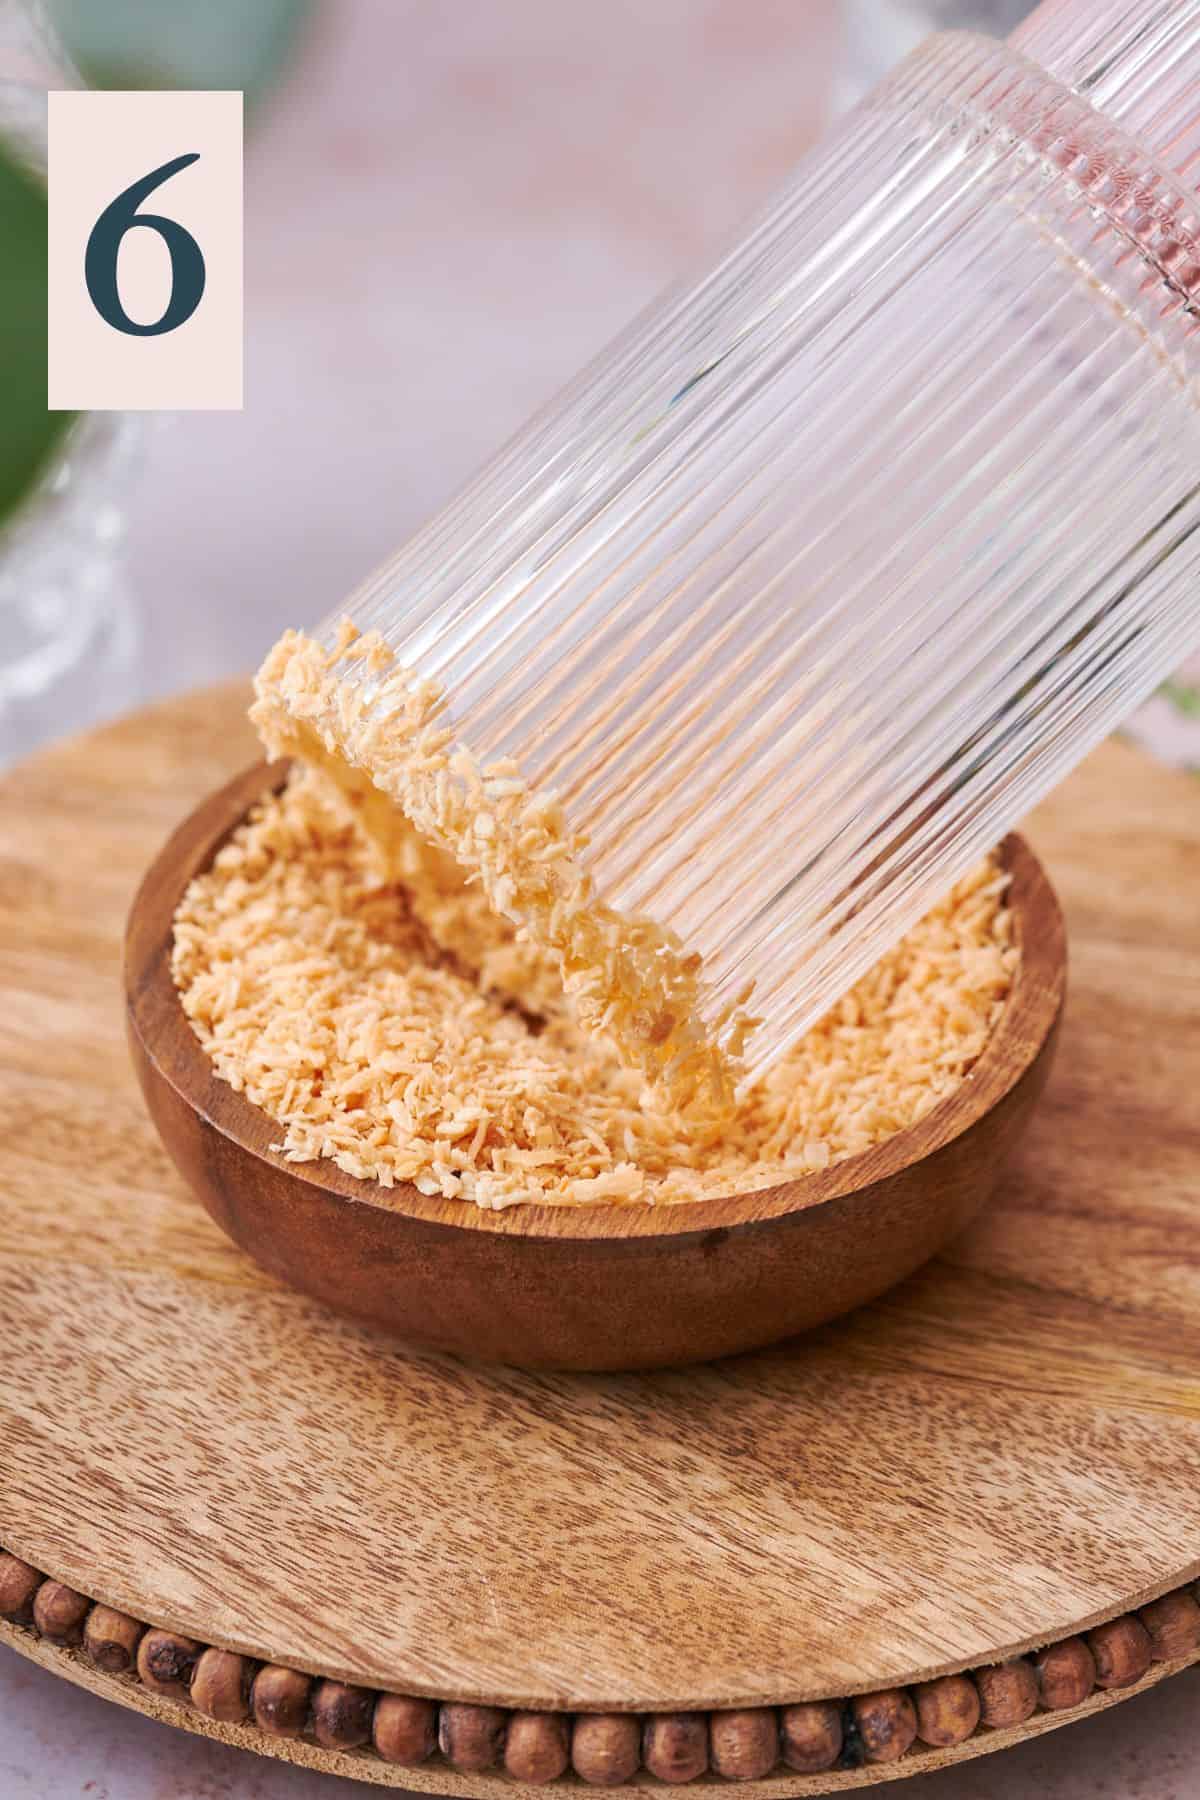 pressing a glass with maple syrup around the rim into a bowl of toasted coconut to get the flakes to stick to the edge of the glass.